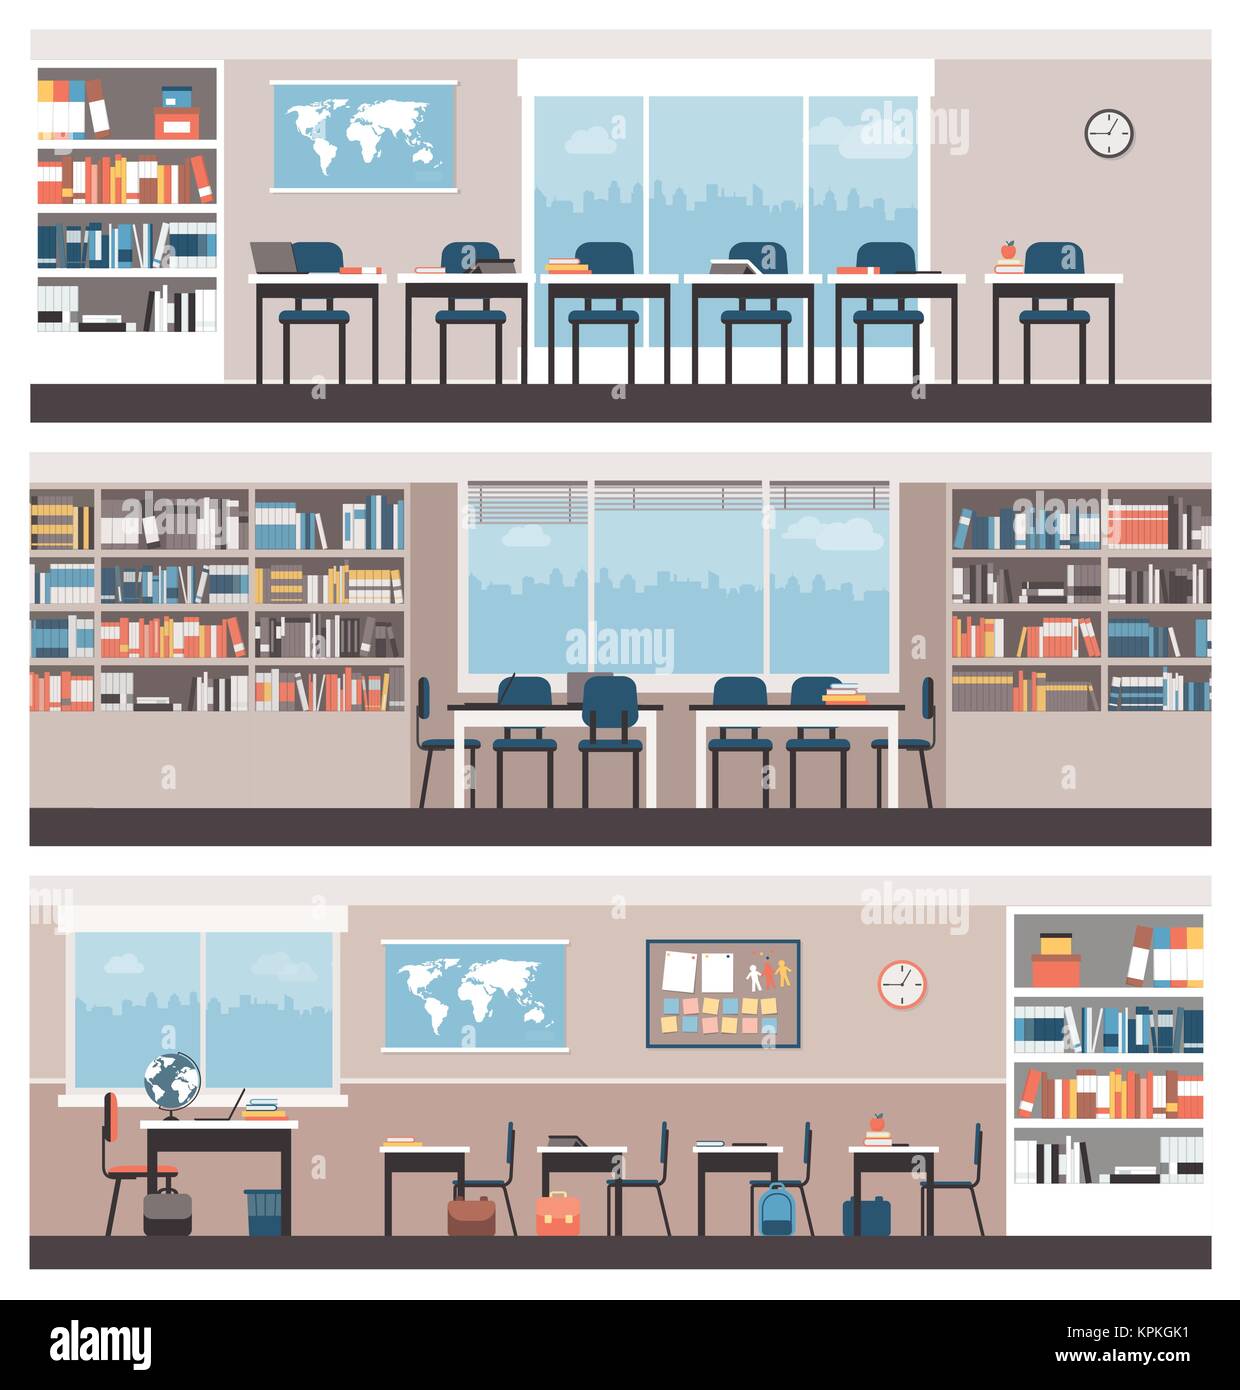 School and library interiors: education and learning concept Stock Vector